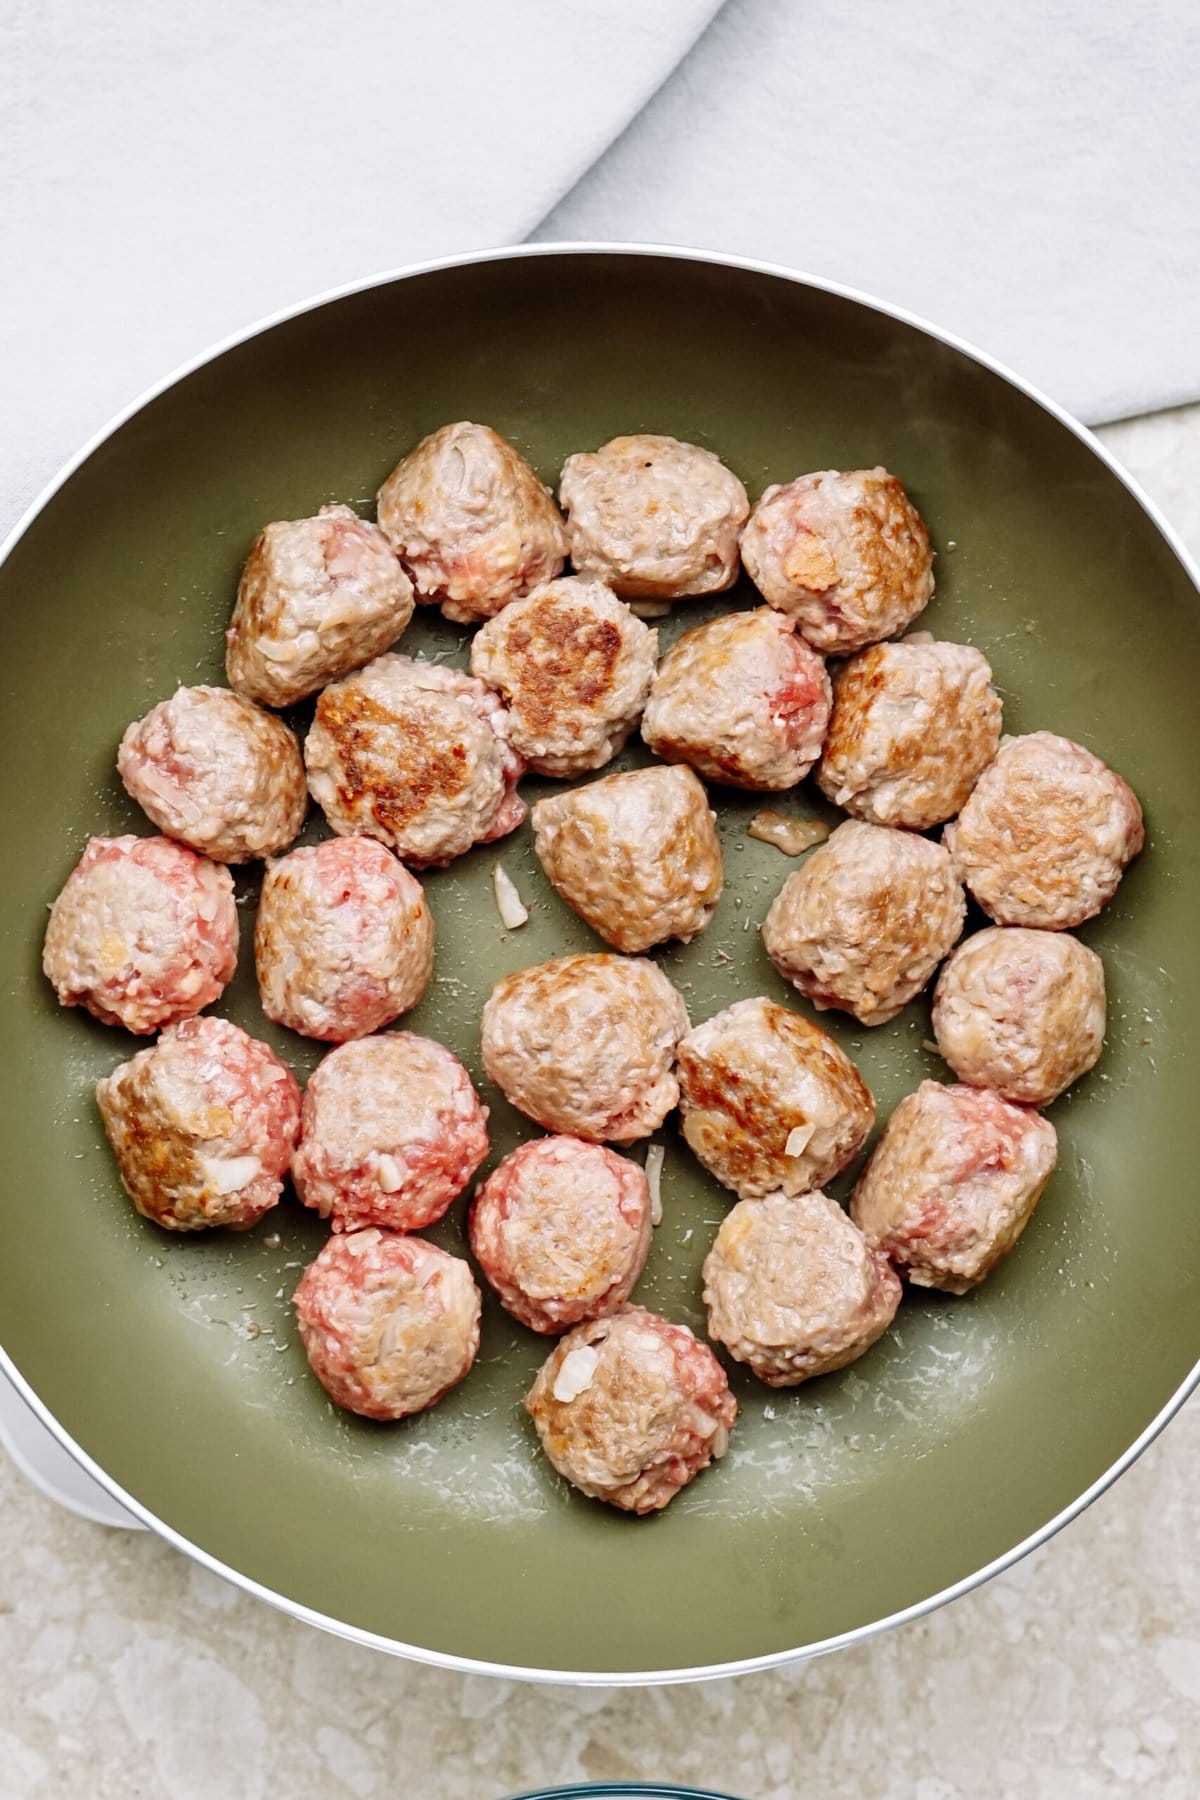 Raw meatballs partially cooked in a frying pan.